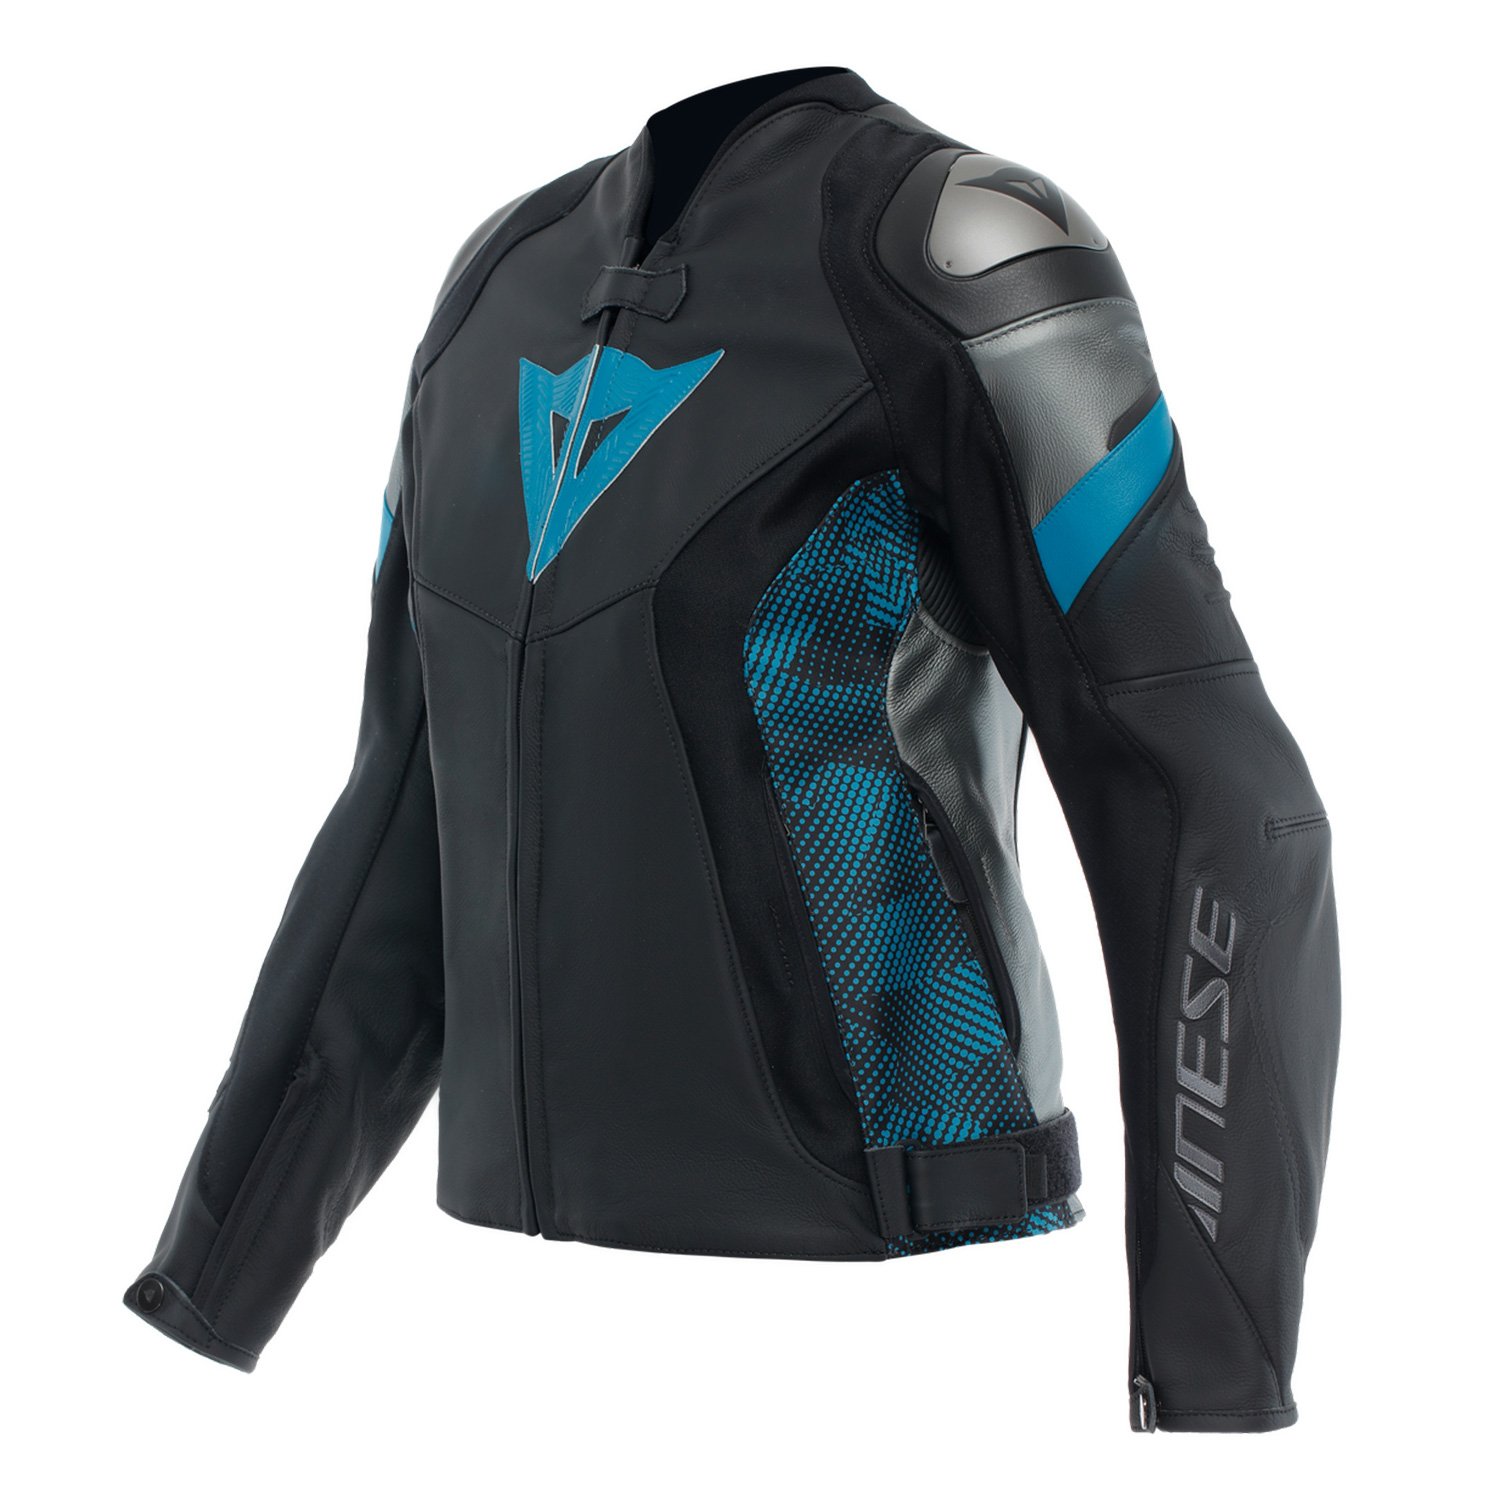 Image of Dainese Avro 5 Leather Jacket WMN Black Teal Anthracite Größe 52